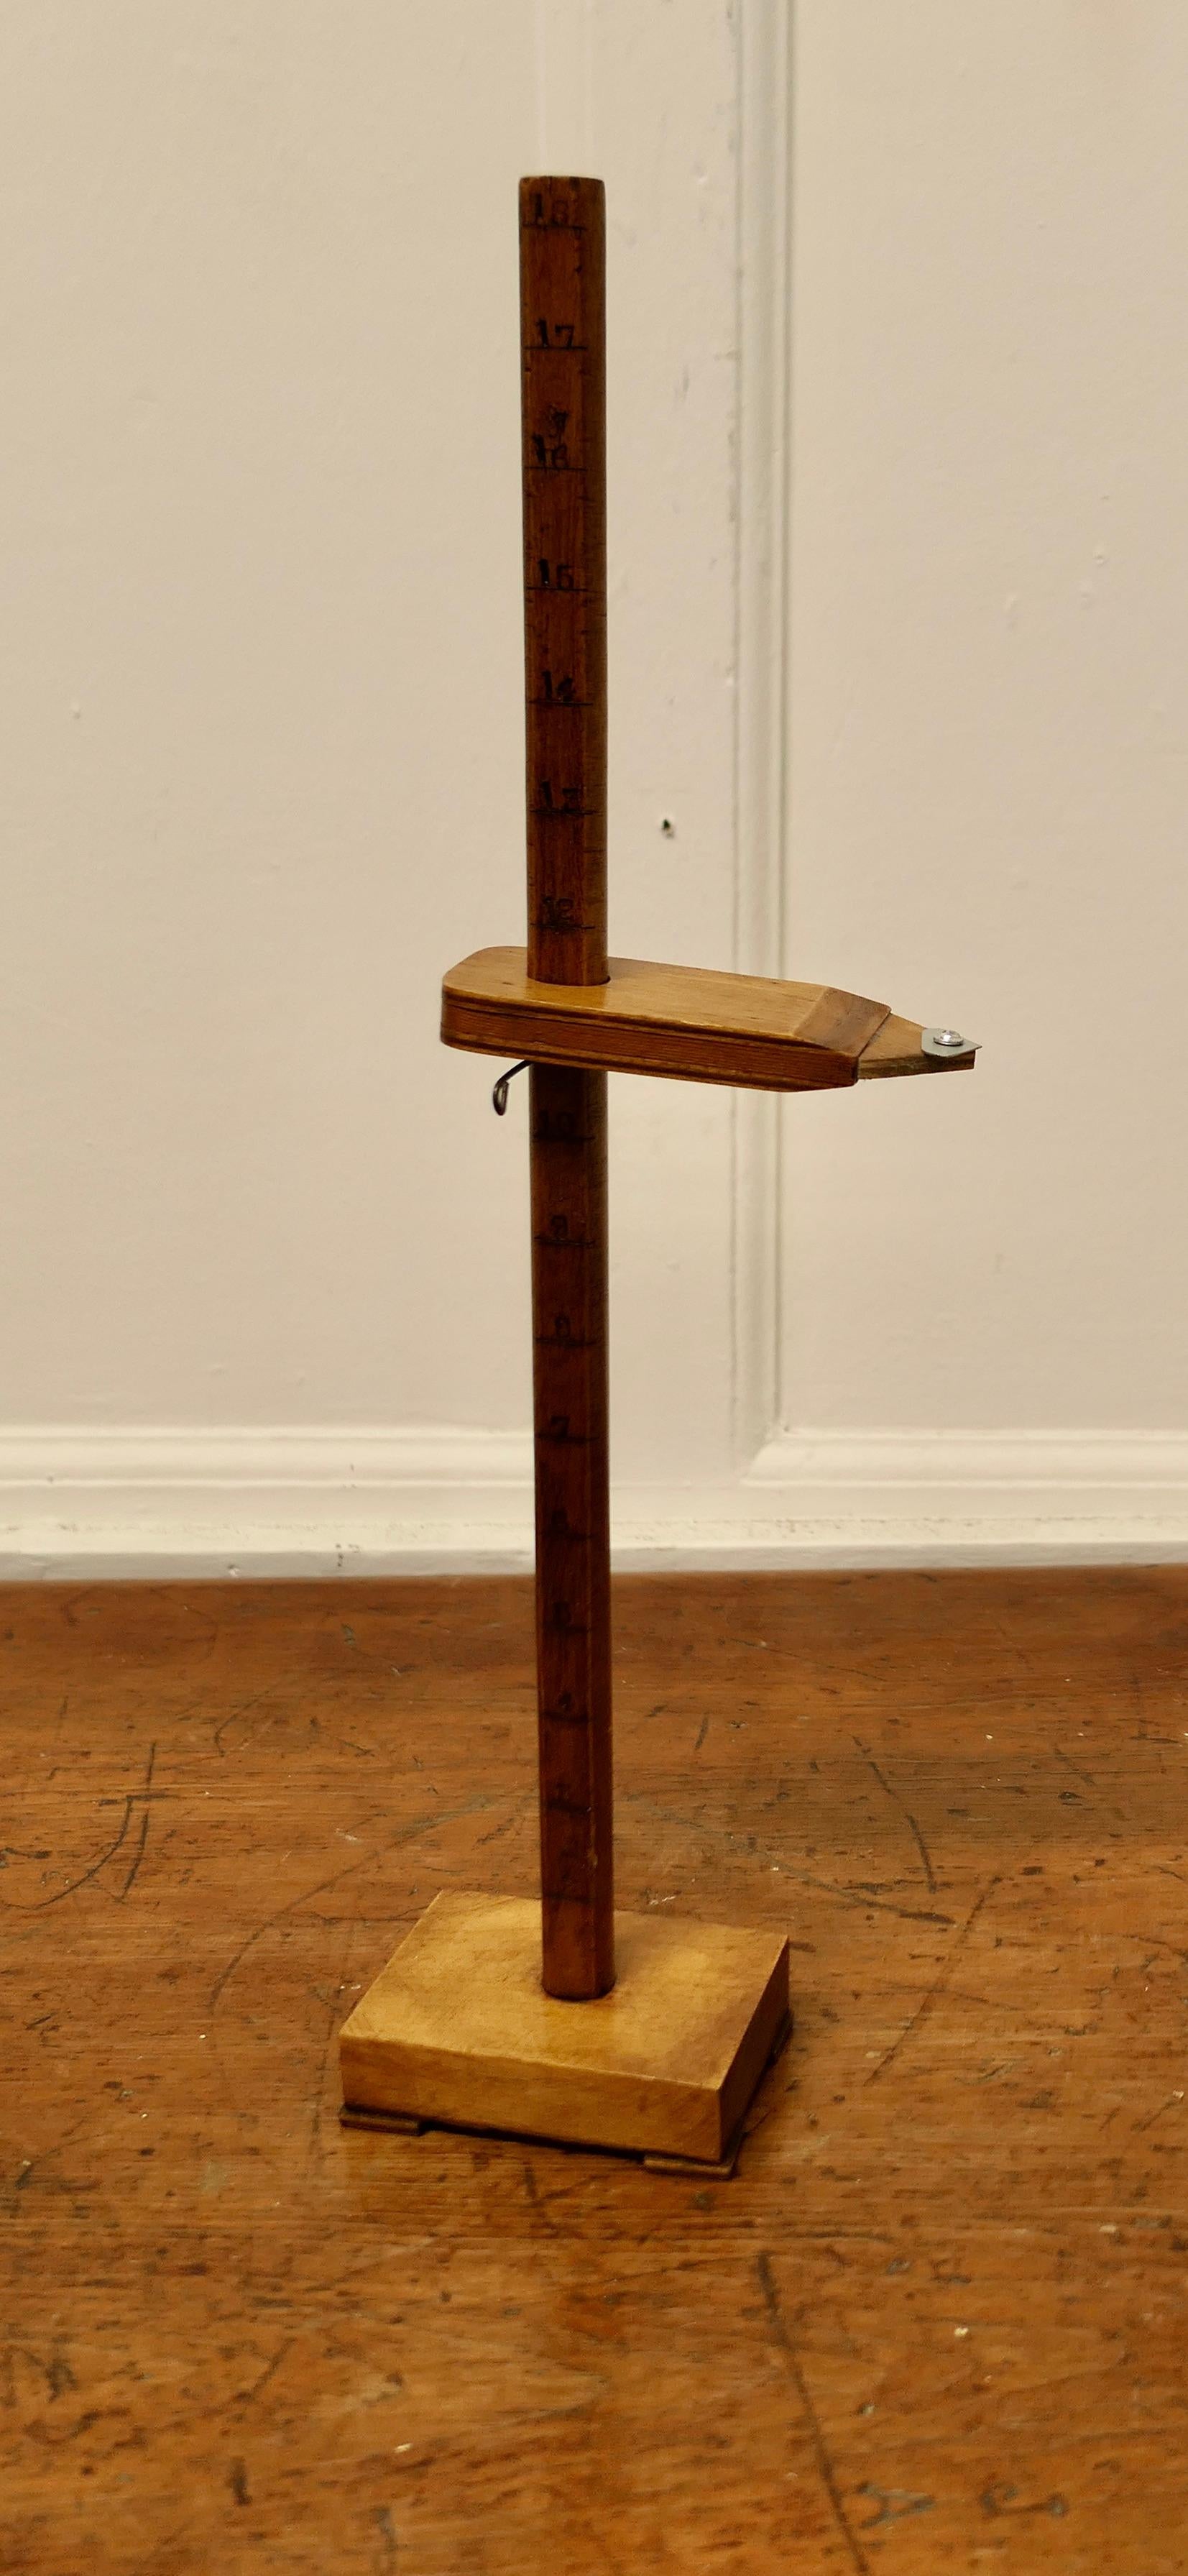 Dressmaker’s Hem Height Skirt Marker

Beech Skirt Marker for measuring the height of a skirt from the floor up . This would have been used in a shop to make alterations to the length of the dress
The marker is made in beech it is 19” tall with 1”